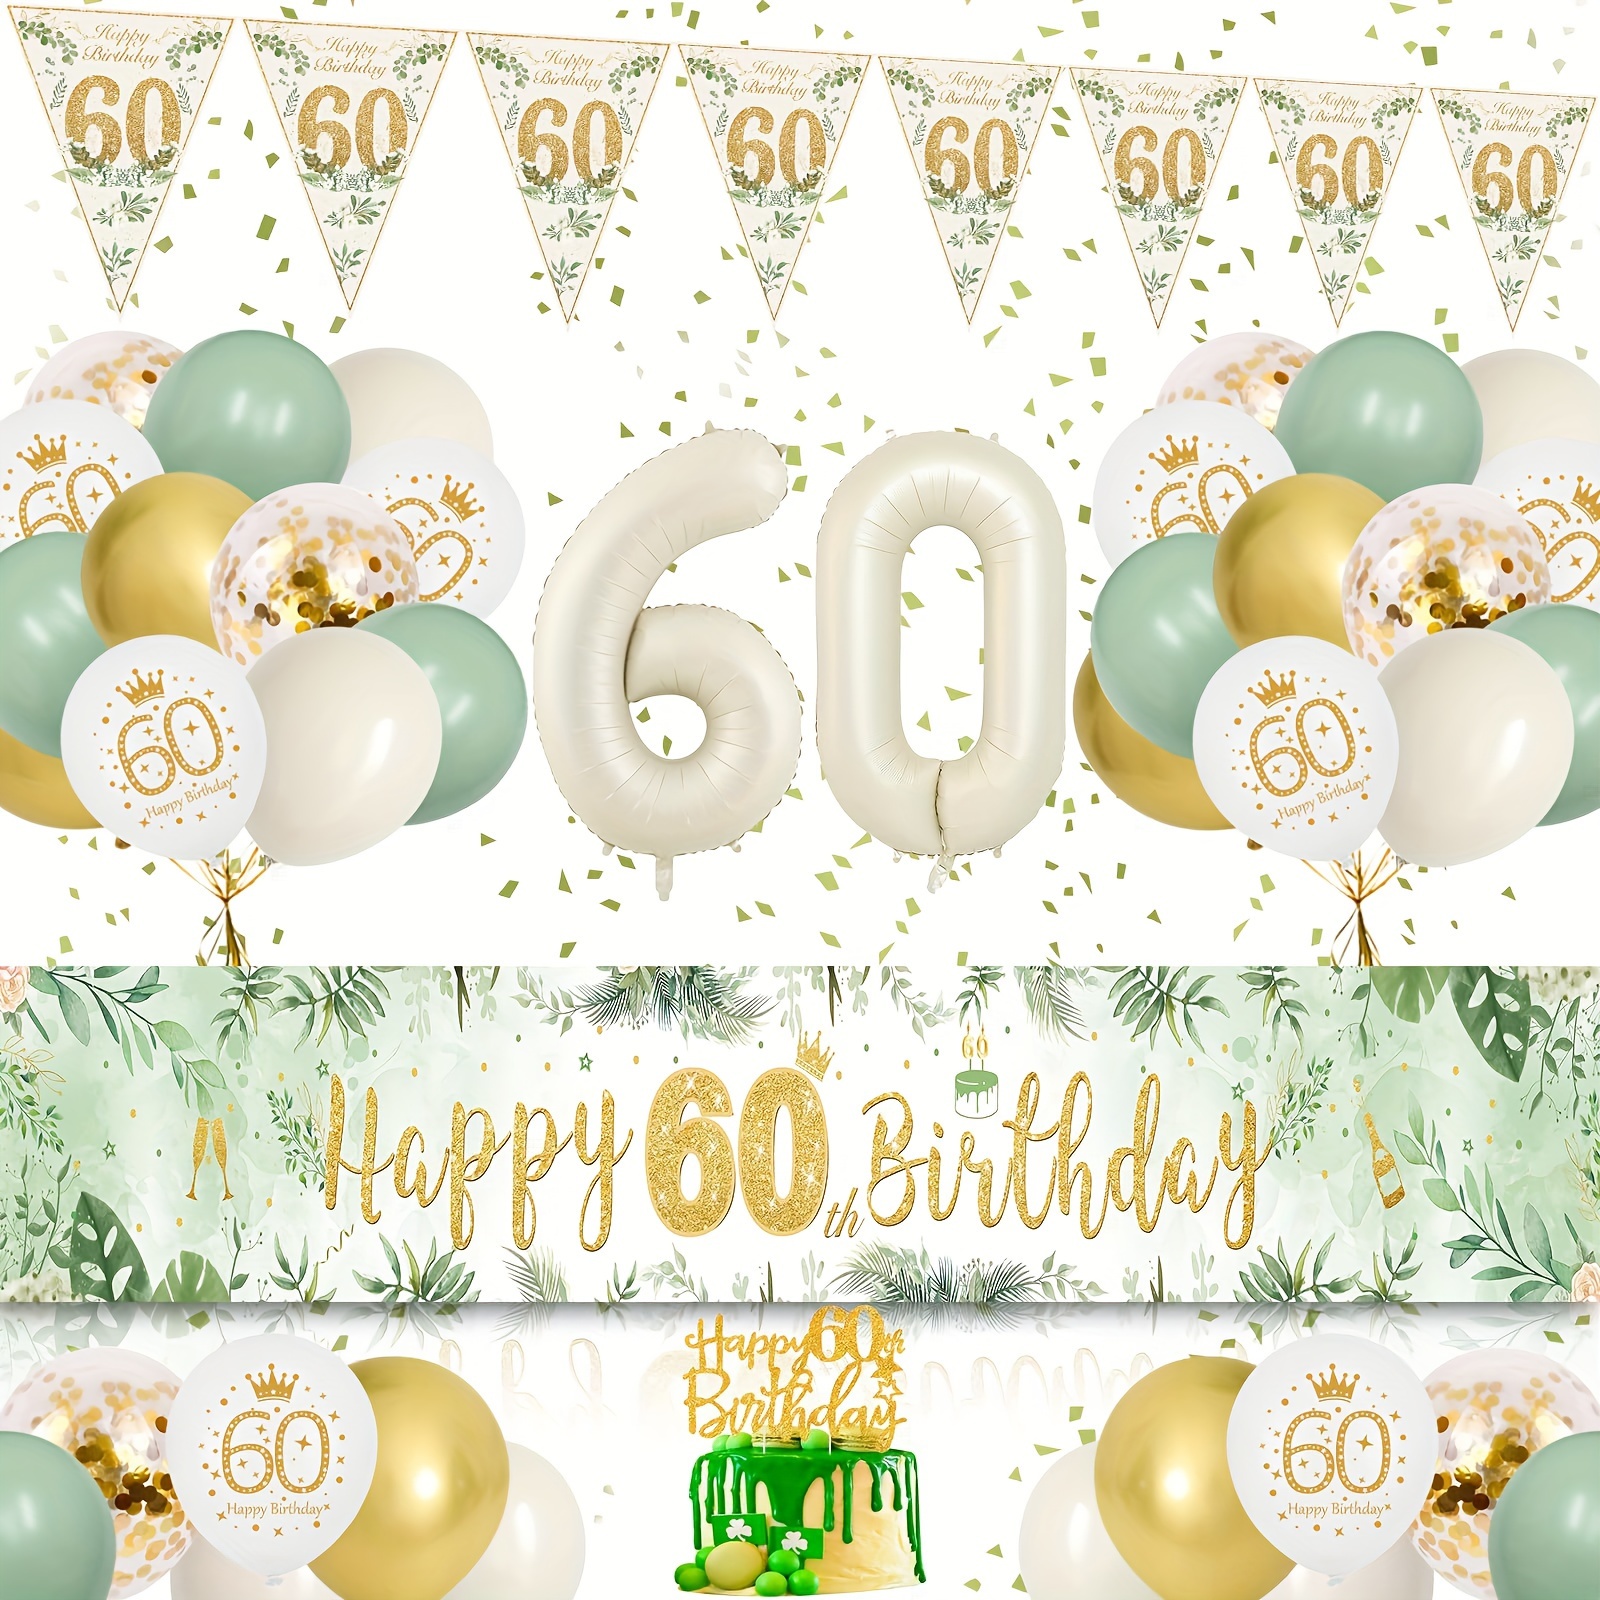 

1set, 60th Birthday Party Green And Golden Balloon Decoration, Including Flags, Banners, Number Balloons 60 And Green And Golden Balloons, Suitable For 60th Birthday Party Balloon Decoration